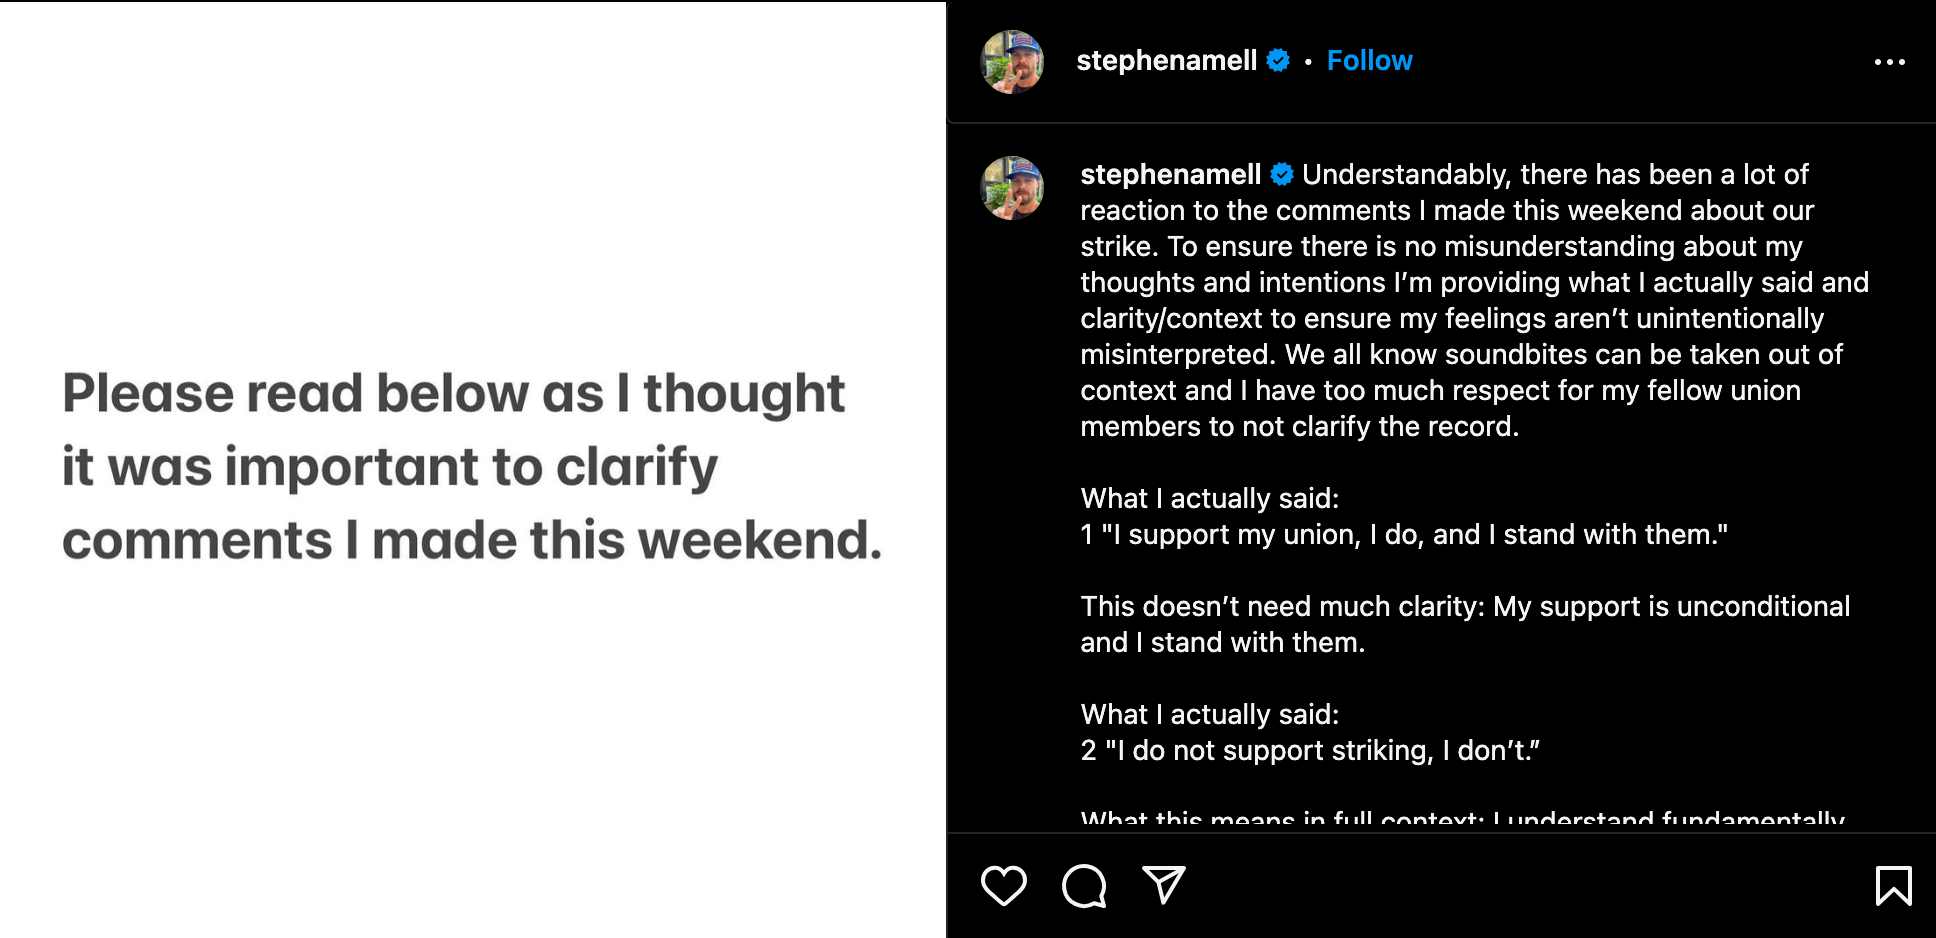 Stephen Amell clarifies his stance on the actors’ strike after calling it ‘reductive’